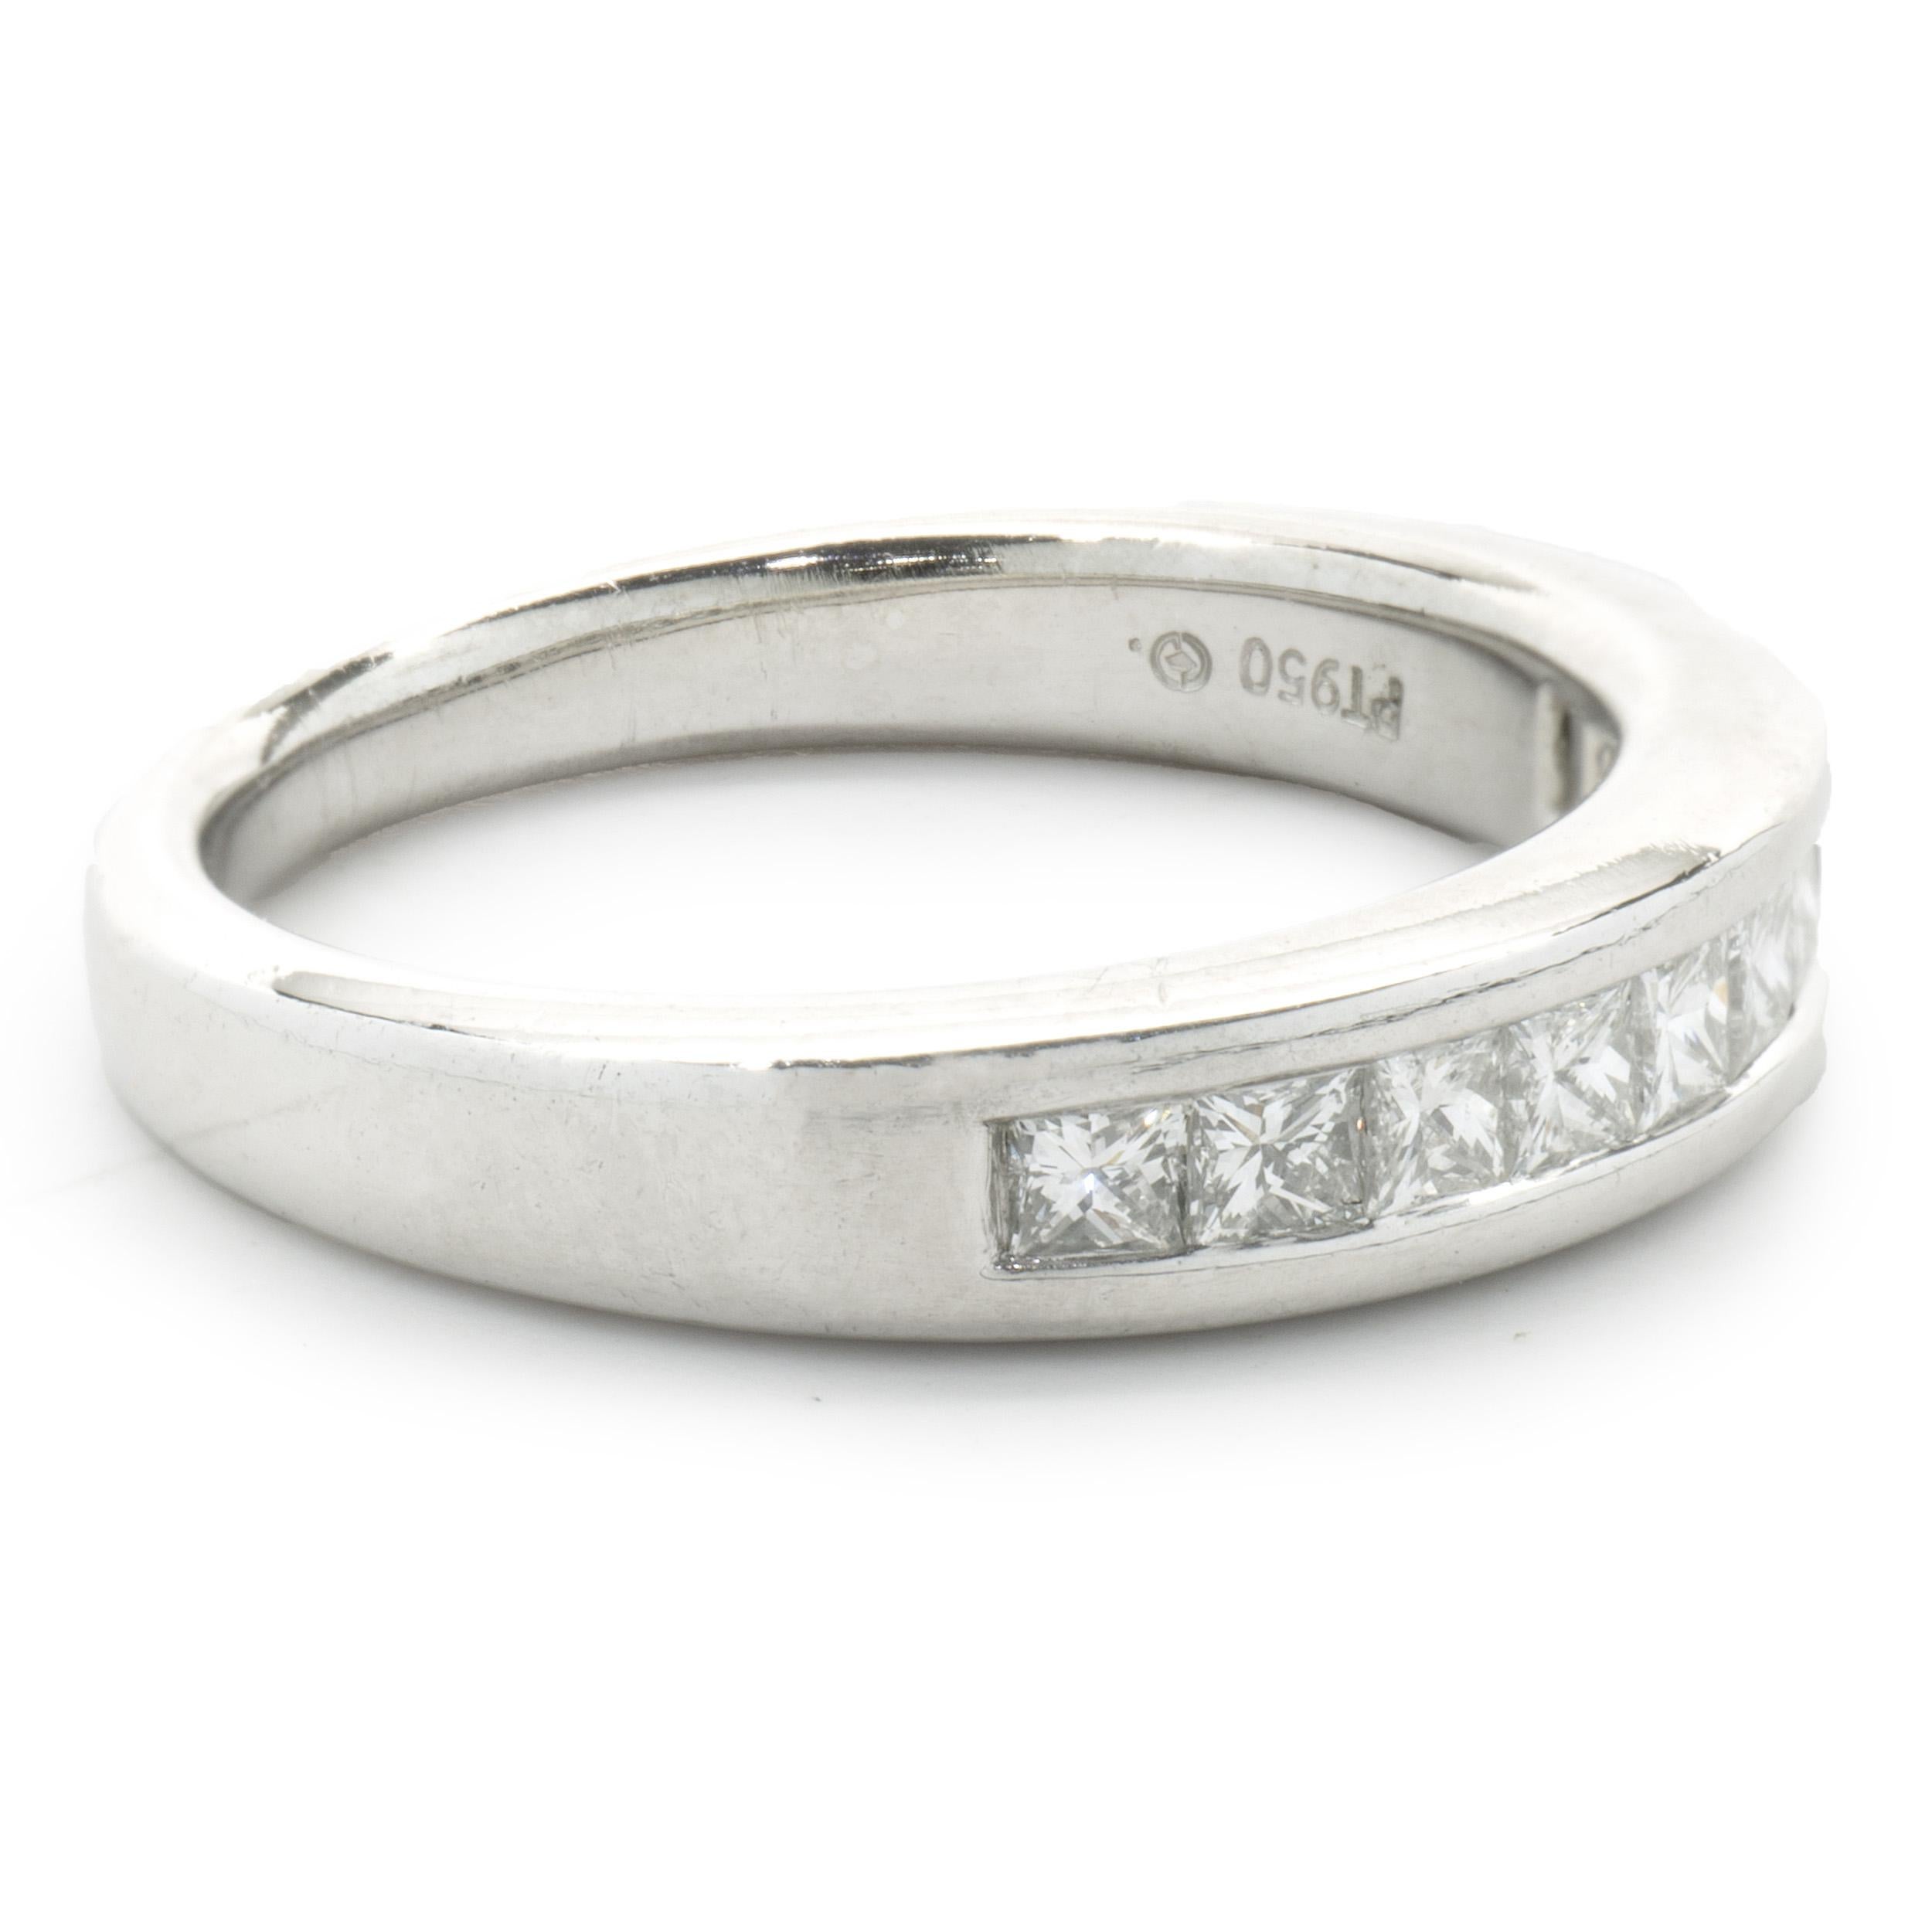 Designer: Custom
Material: 14K white gold
Diamonds: 10 princess cut = 0.30cttw
Color: I
Clarity: SI1-2
Size: 6 sizing available 
Dimensions: ring measures 4mm in width
Weight: 6.91 grams